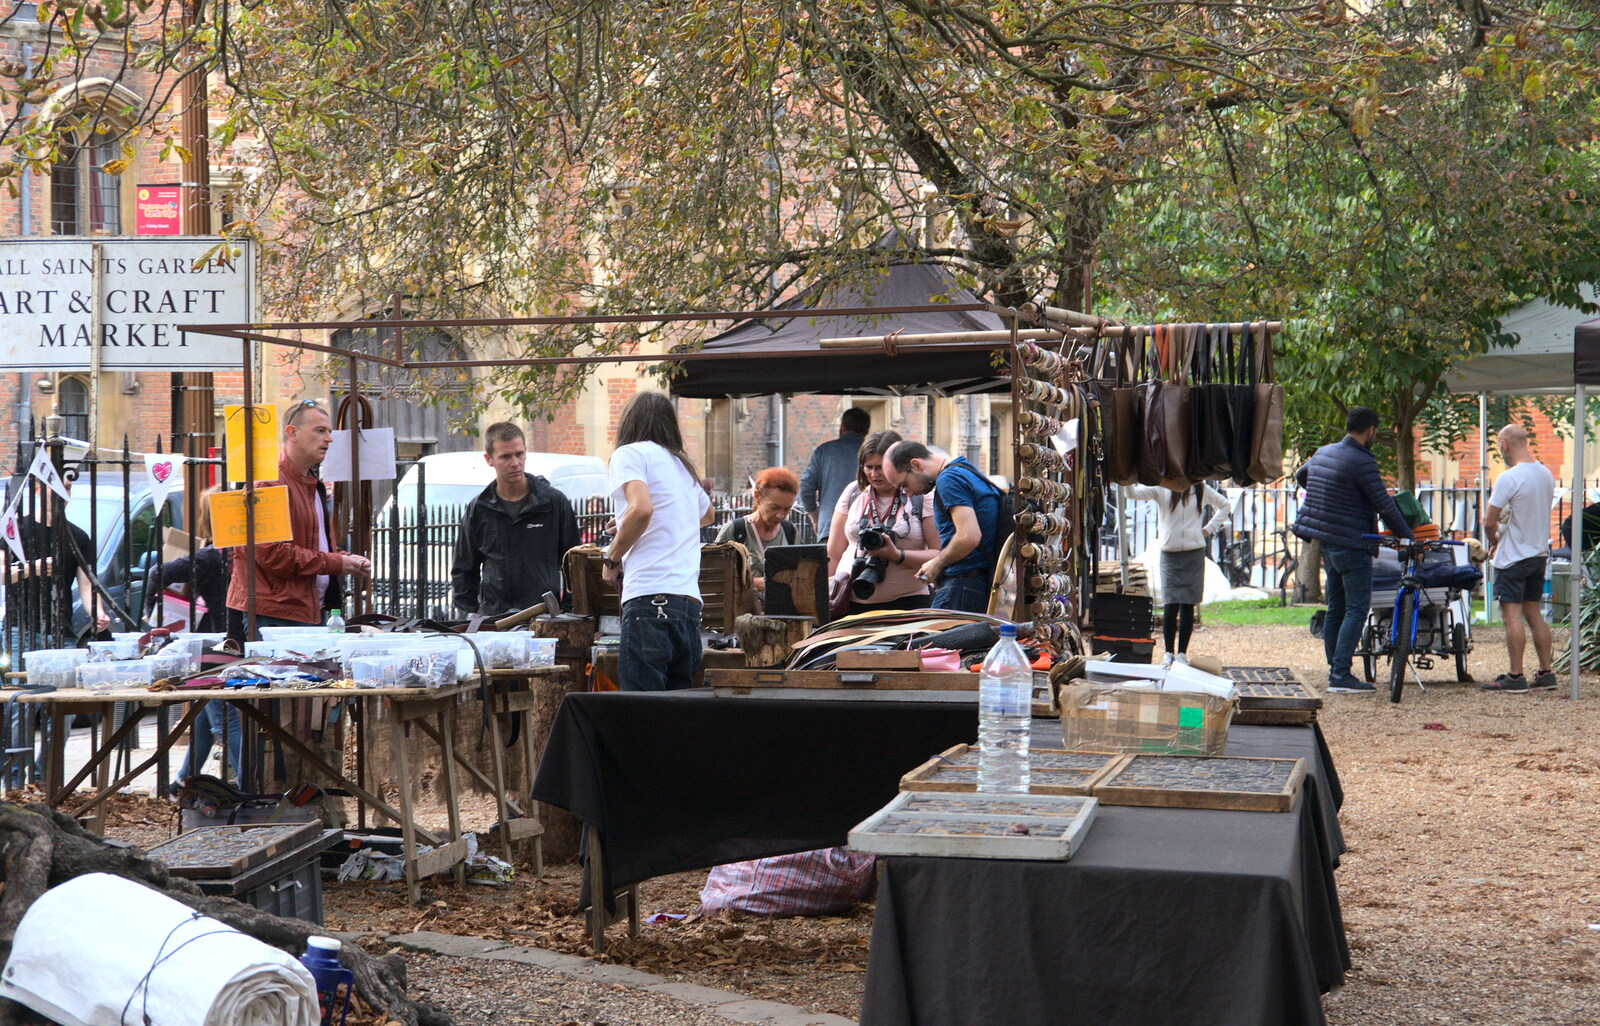 All Saints Garden craft market looks very autumnal from The Retro Computer Festival, Centre For Computing History, Cambridge - 15th September 2018